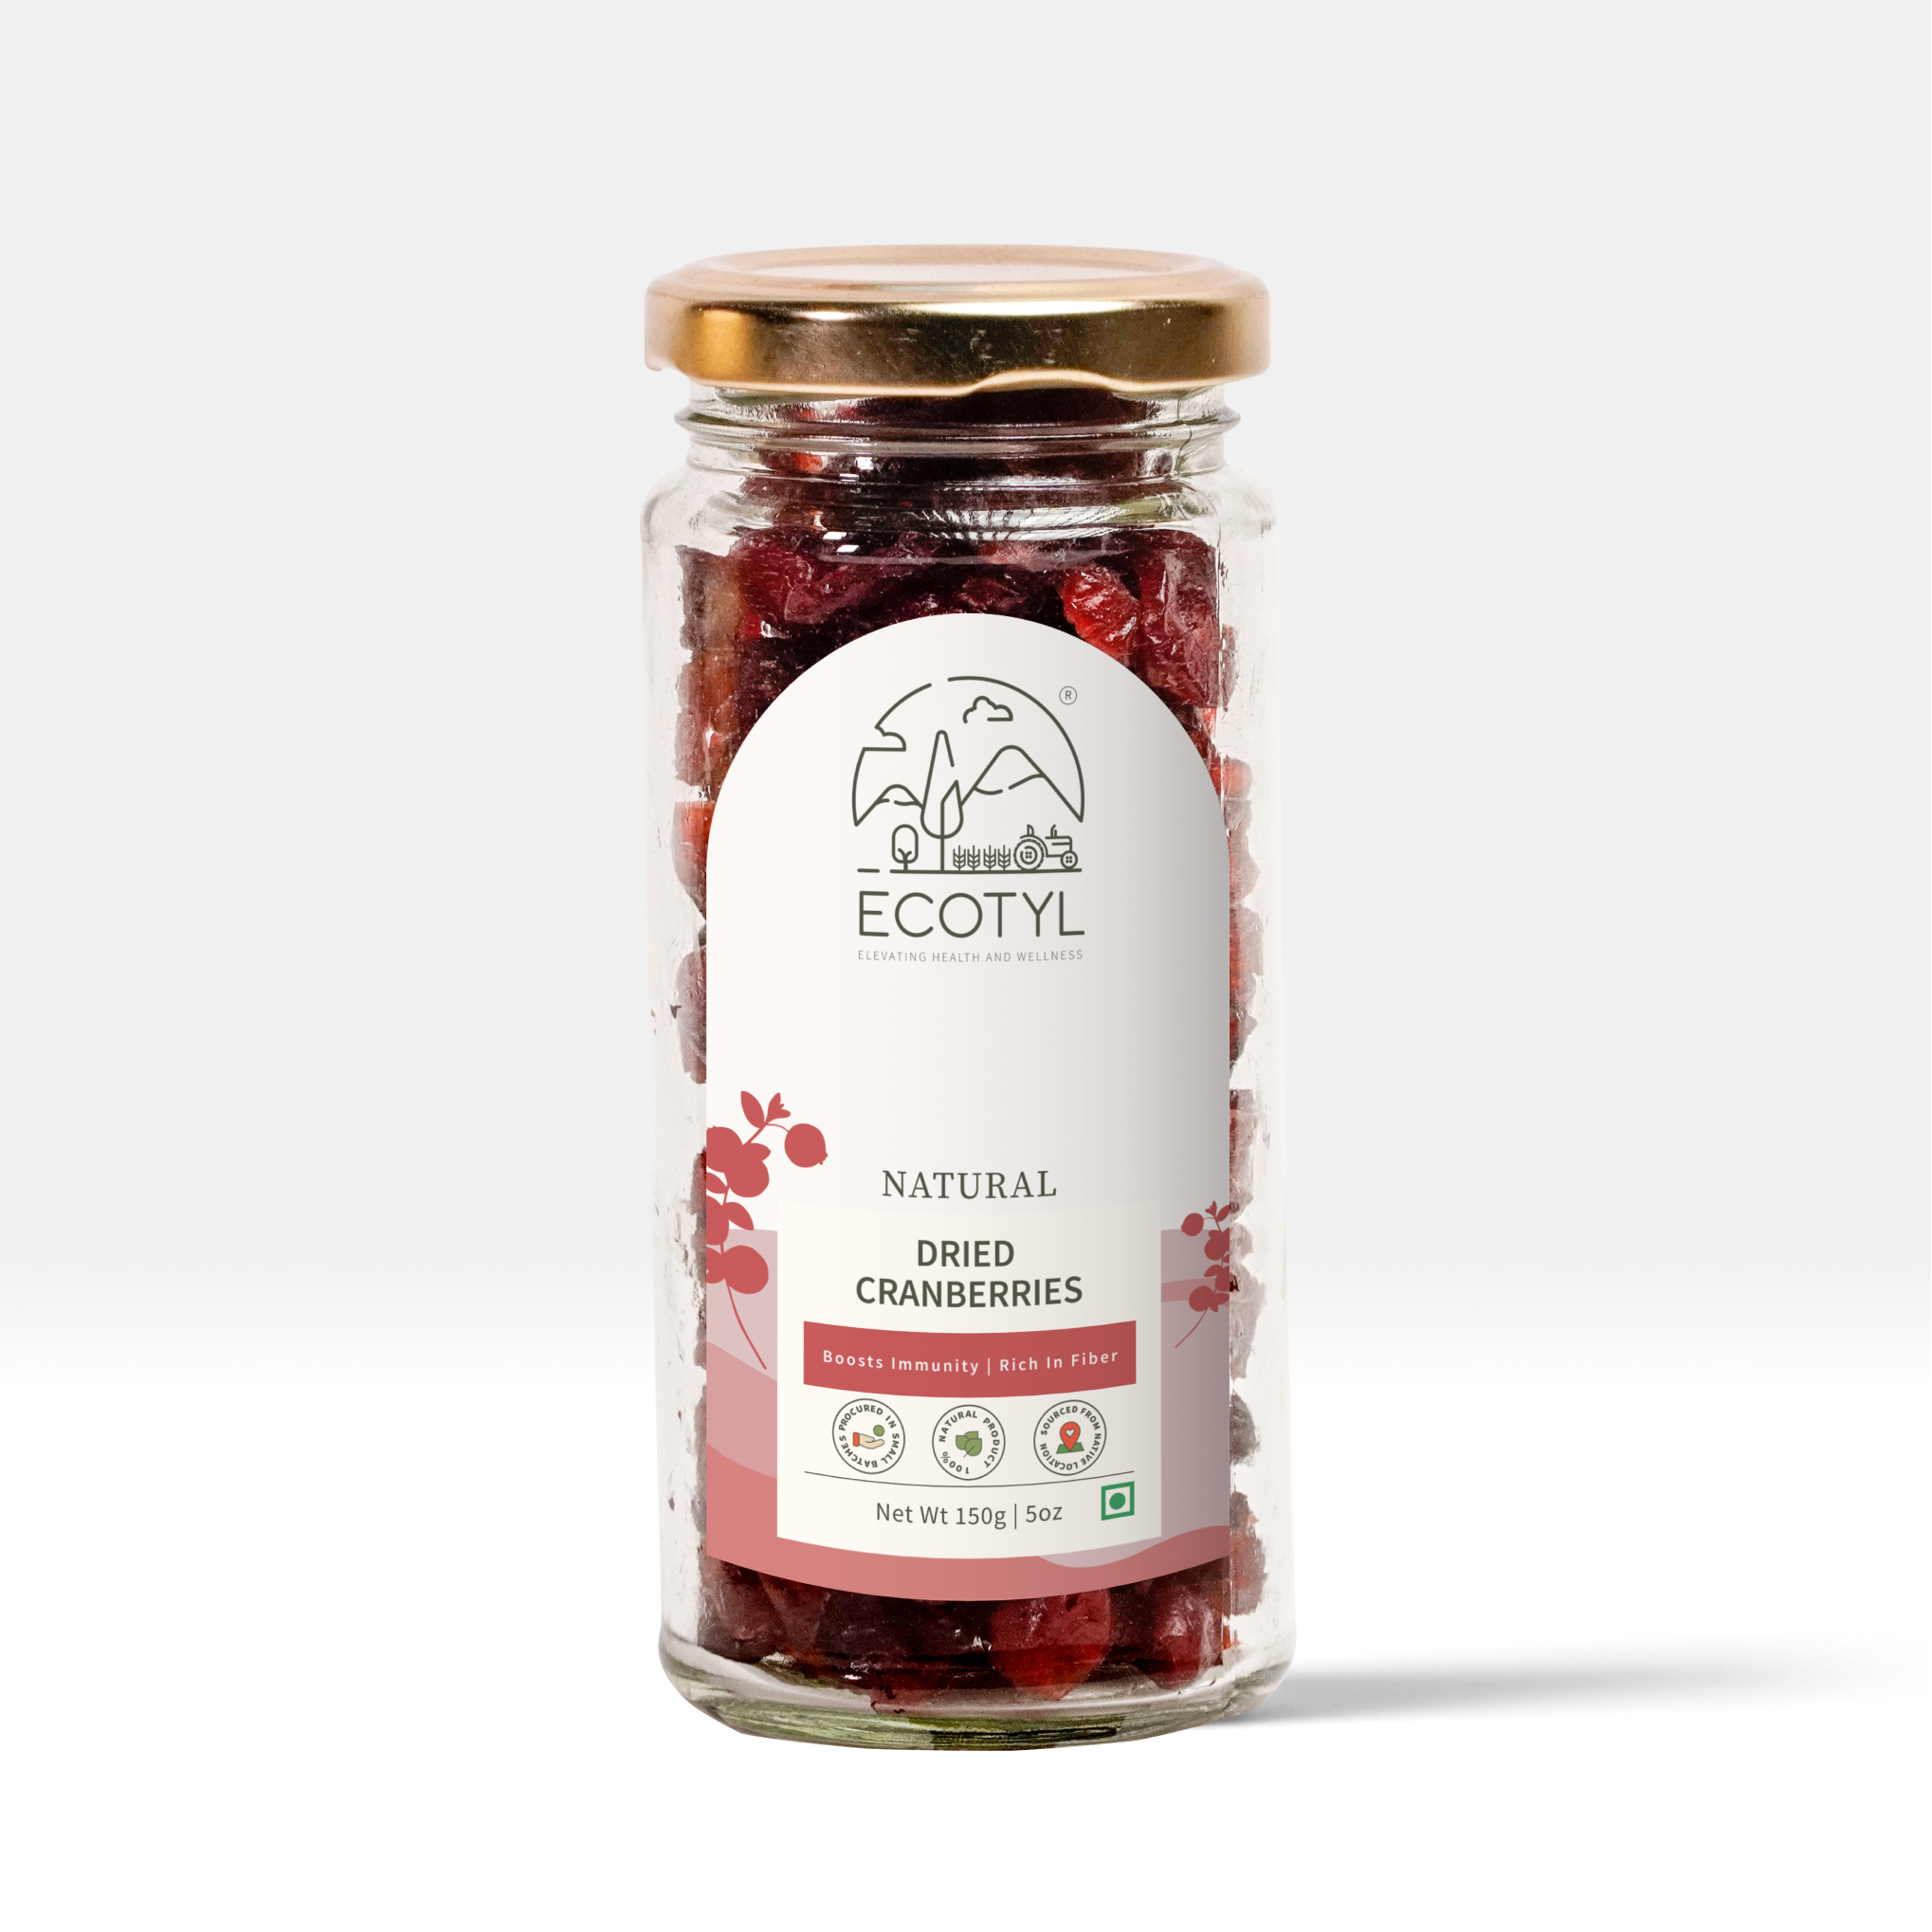 Buy Ecotyl Natural Dried Cranberries - 150g at Best Price Online